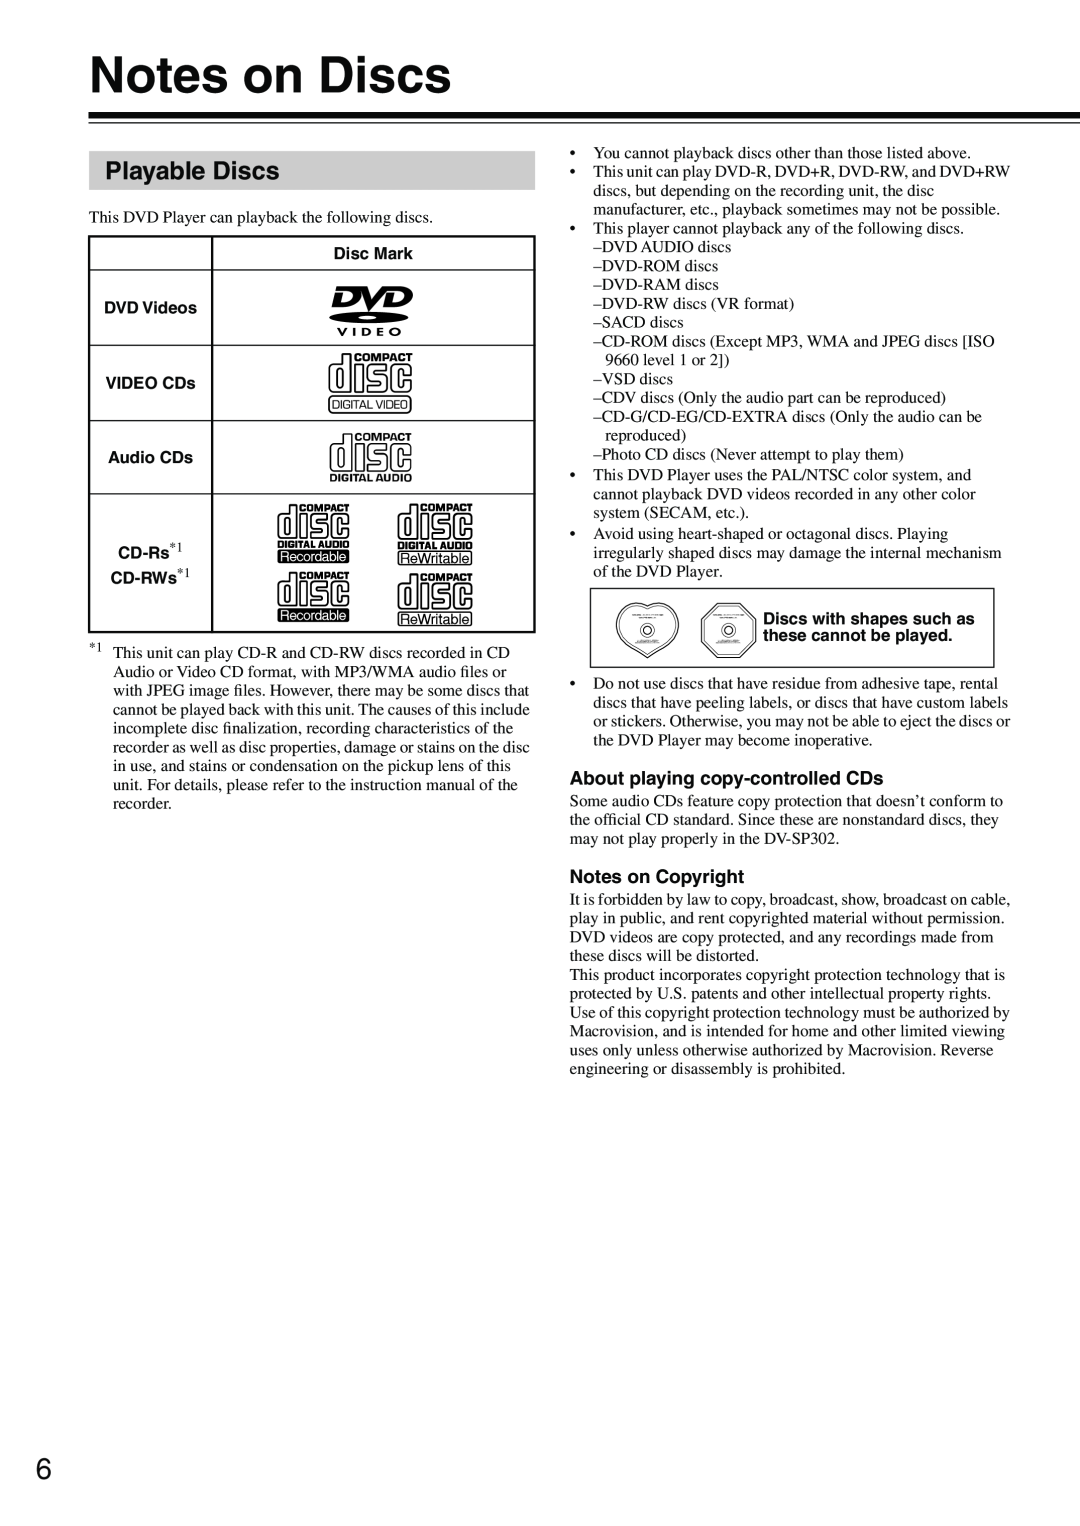 Onkyo DV-SP302 instruction manual Notes on Discs, Playable Discs, About playing copy-controlled CDs, Notes on Copyright 